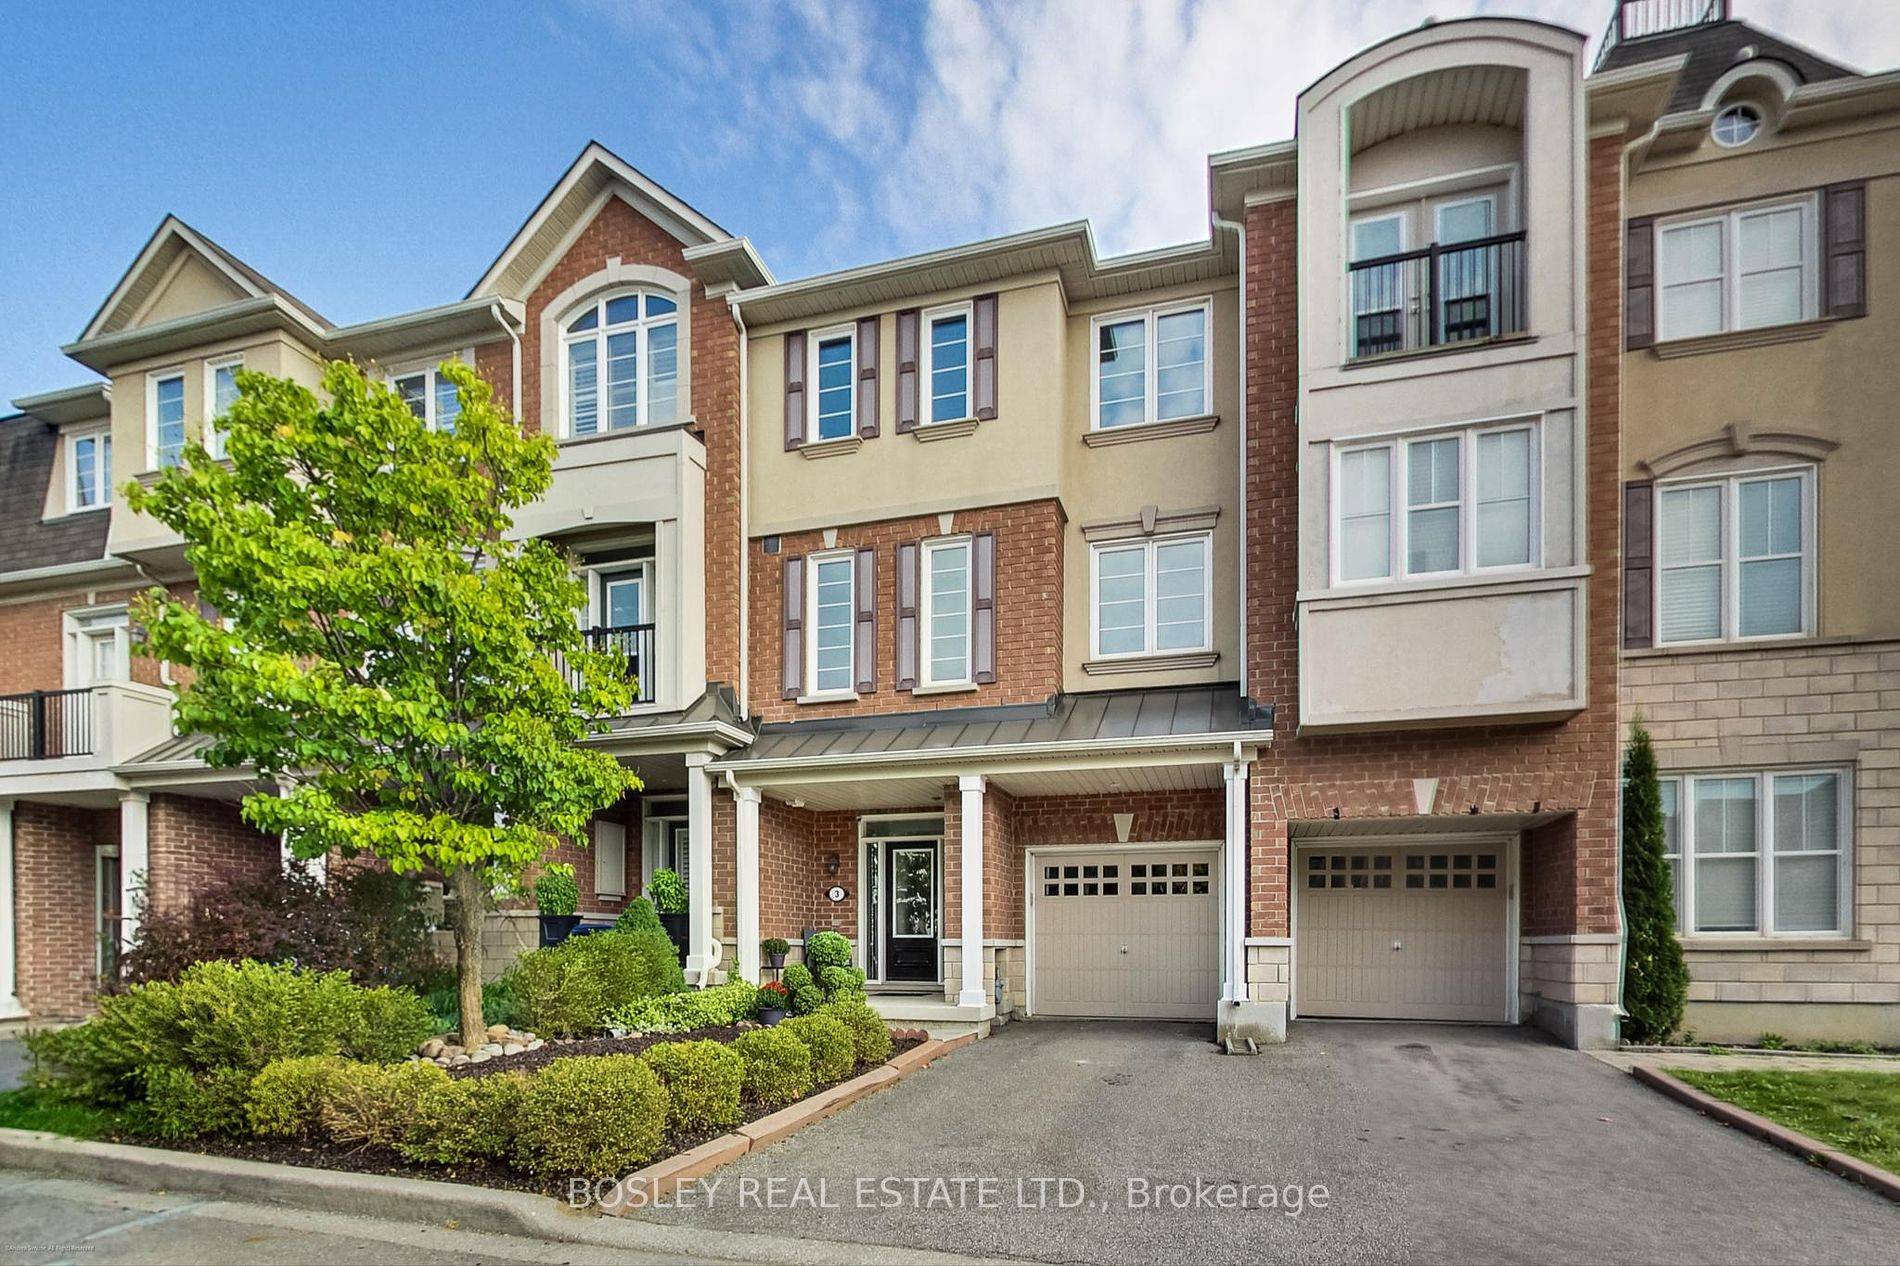 The perfect blend of Design, Space and Functionality in this executive Mattamy wide lot townhome conveniently located just steps from Warden Station.